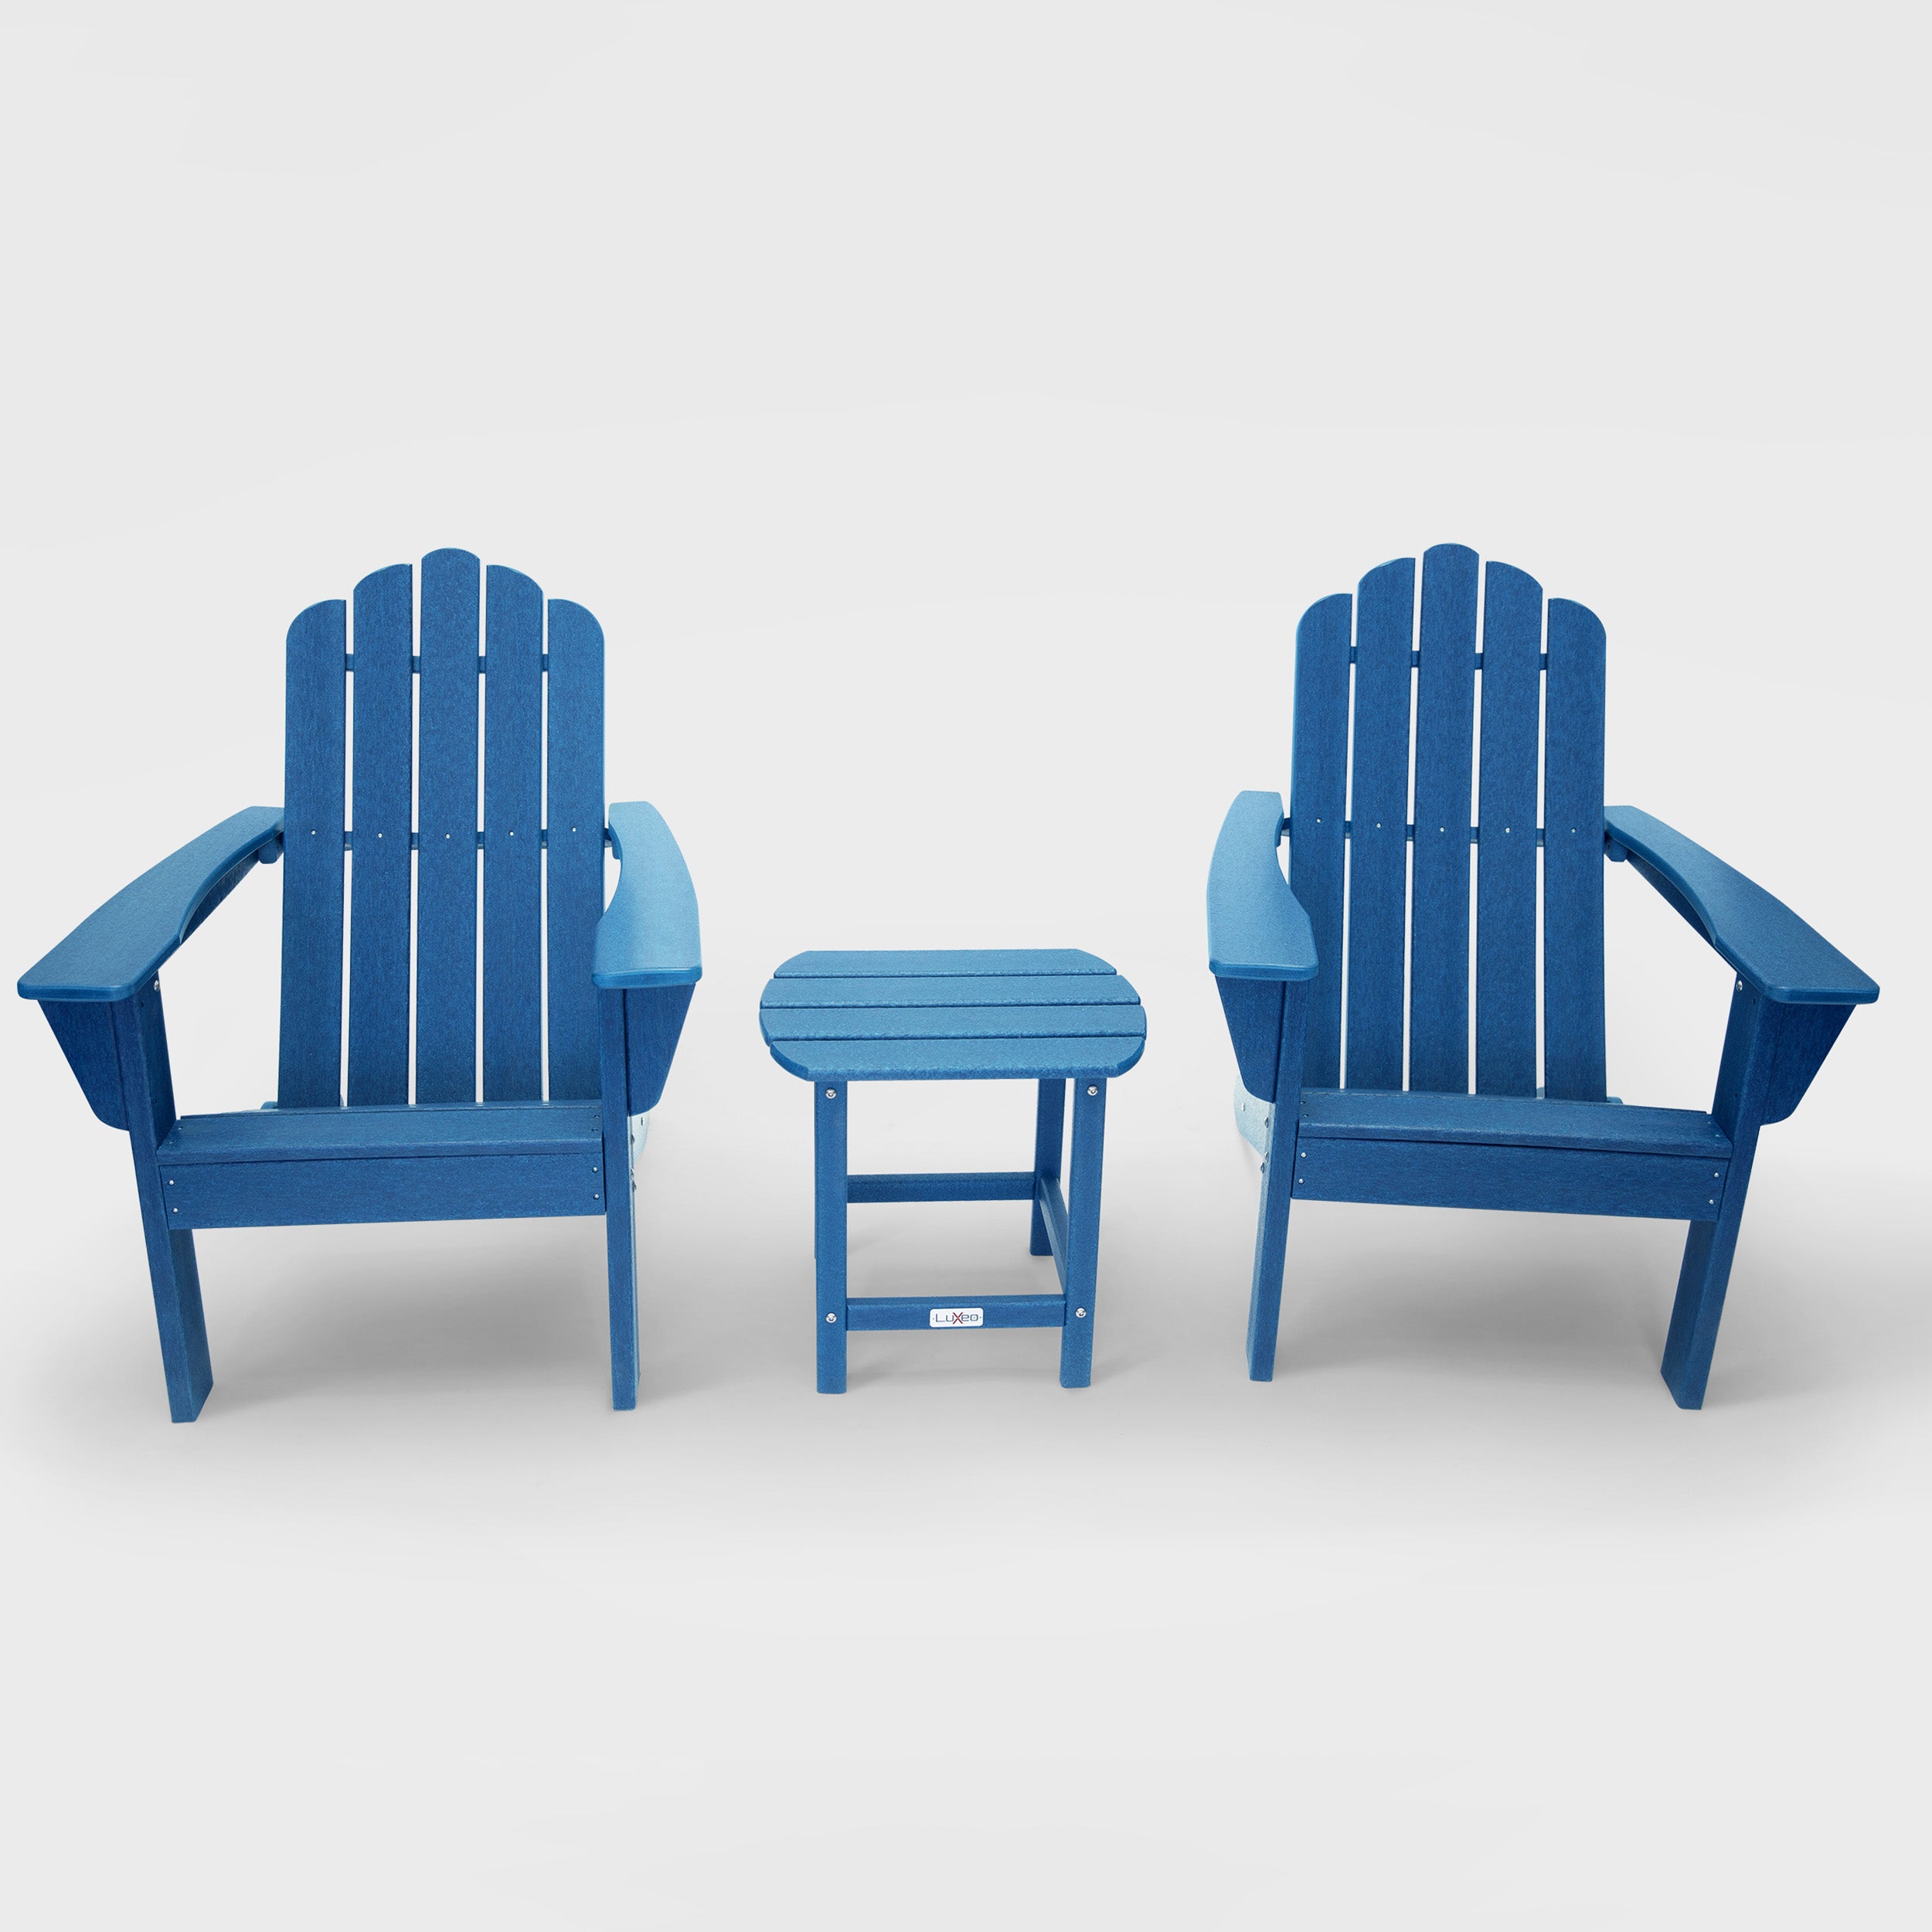 Marina HDPE Recycled Plastic Outdoor Patio Adirondack Chair and Table Set (3-Piece)